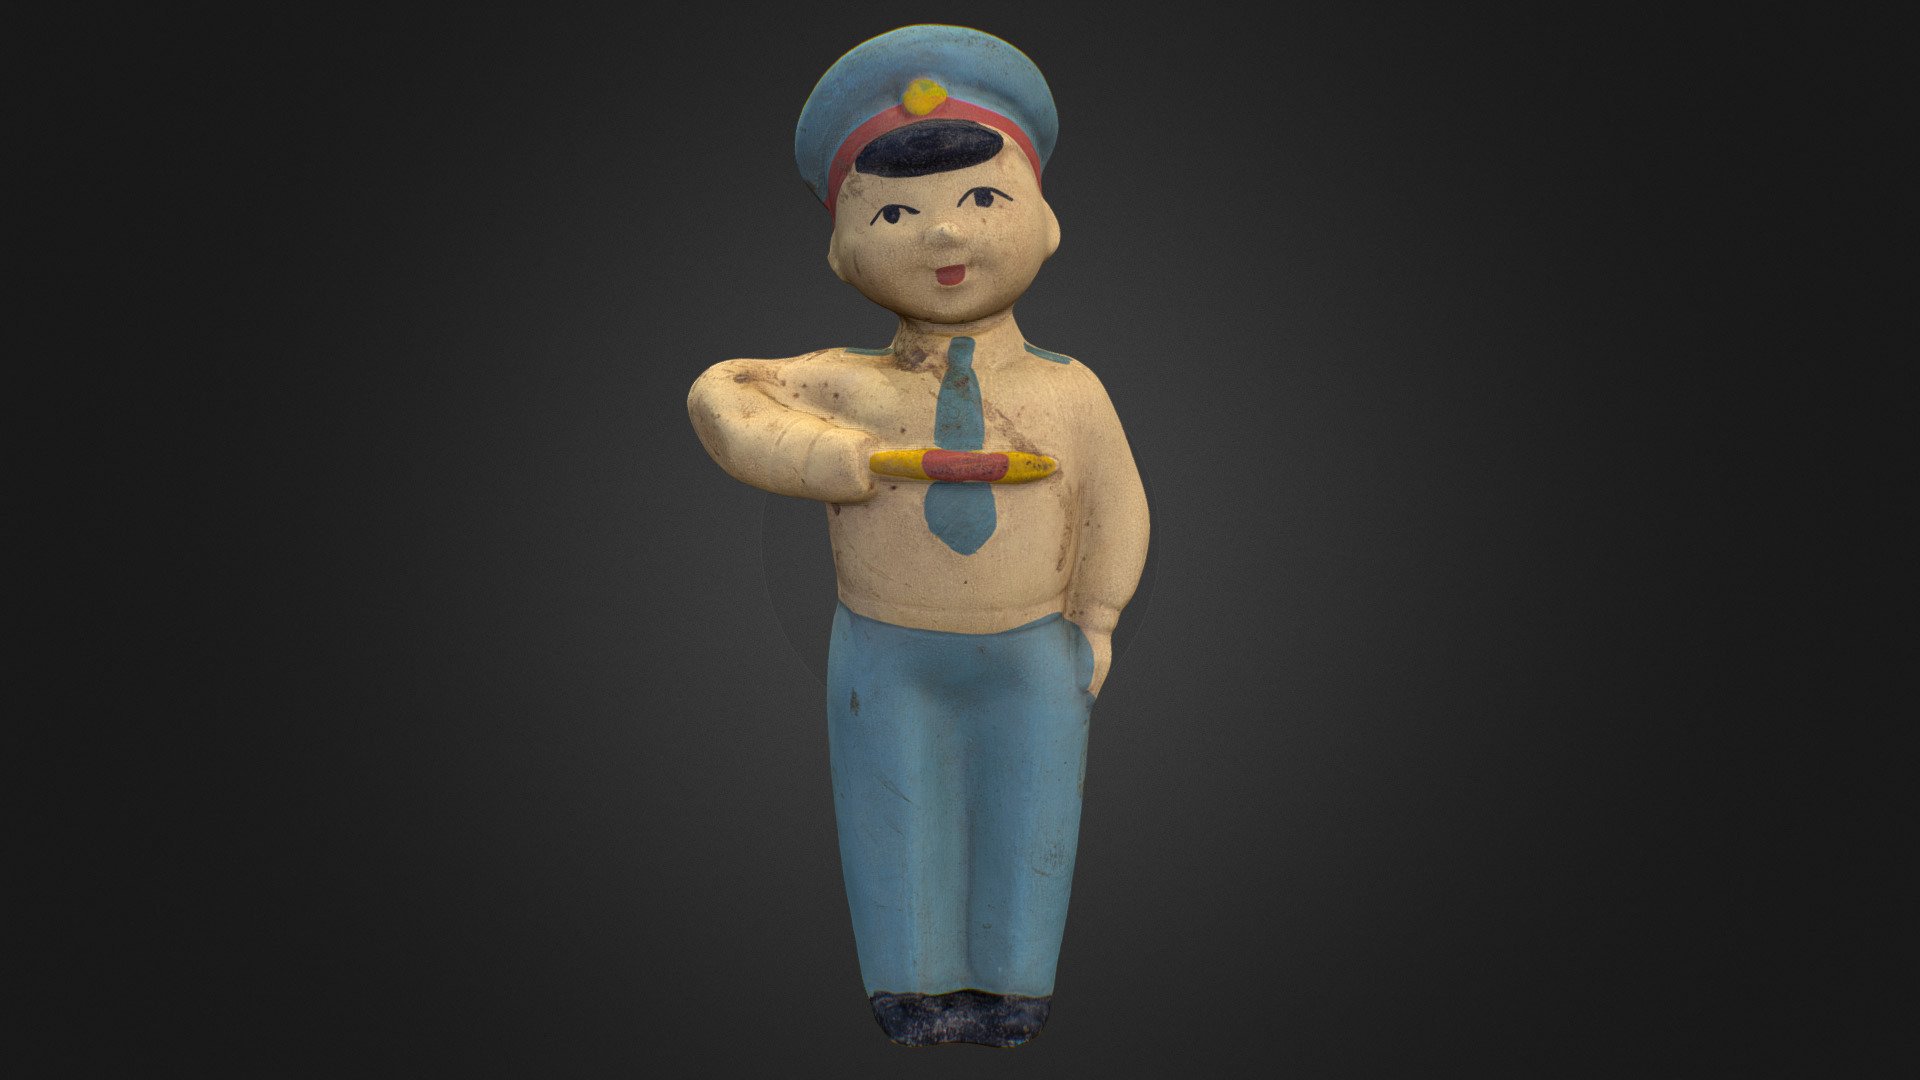 Old USSR Soviet Rubber Toy Policeman Scan High Poly

Including OBJ formats and texture (8192x8192) JPG

Polygons: 100916 Vertices: 50460 - Old USSR Soviet Rubber Toy Policeman - 3D model by Skeptic (@texturus) 3d model